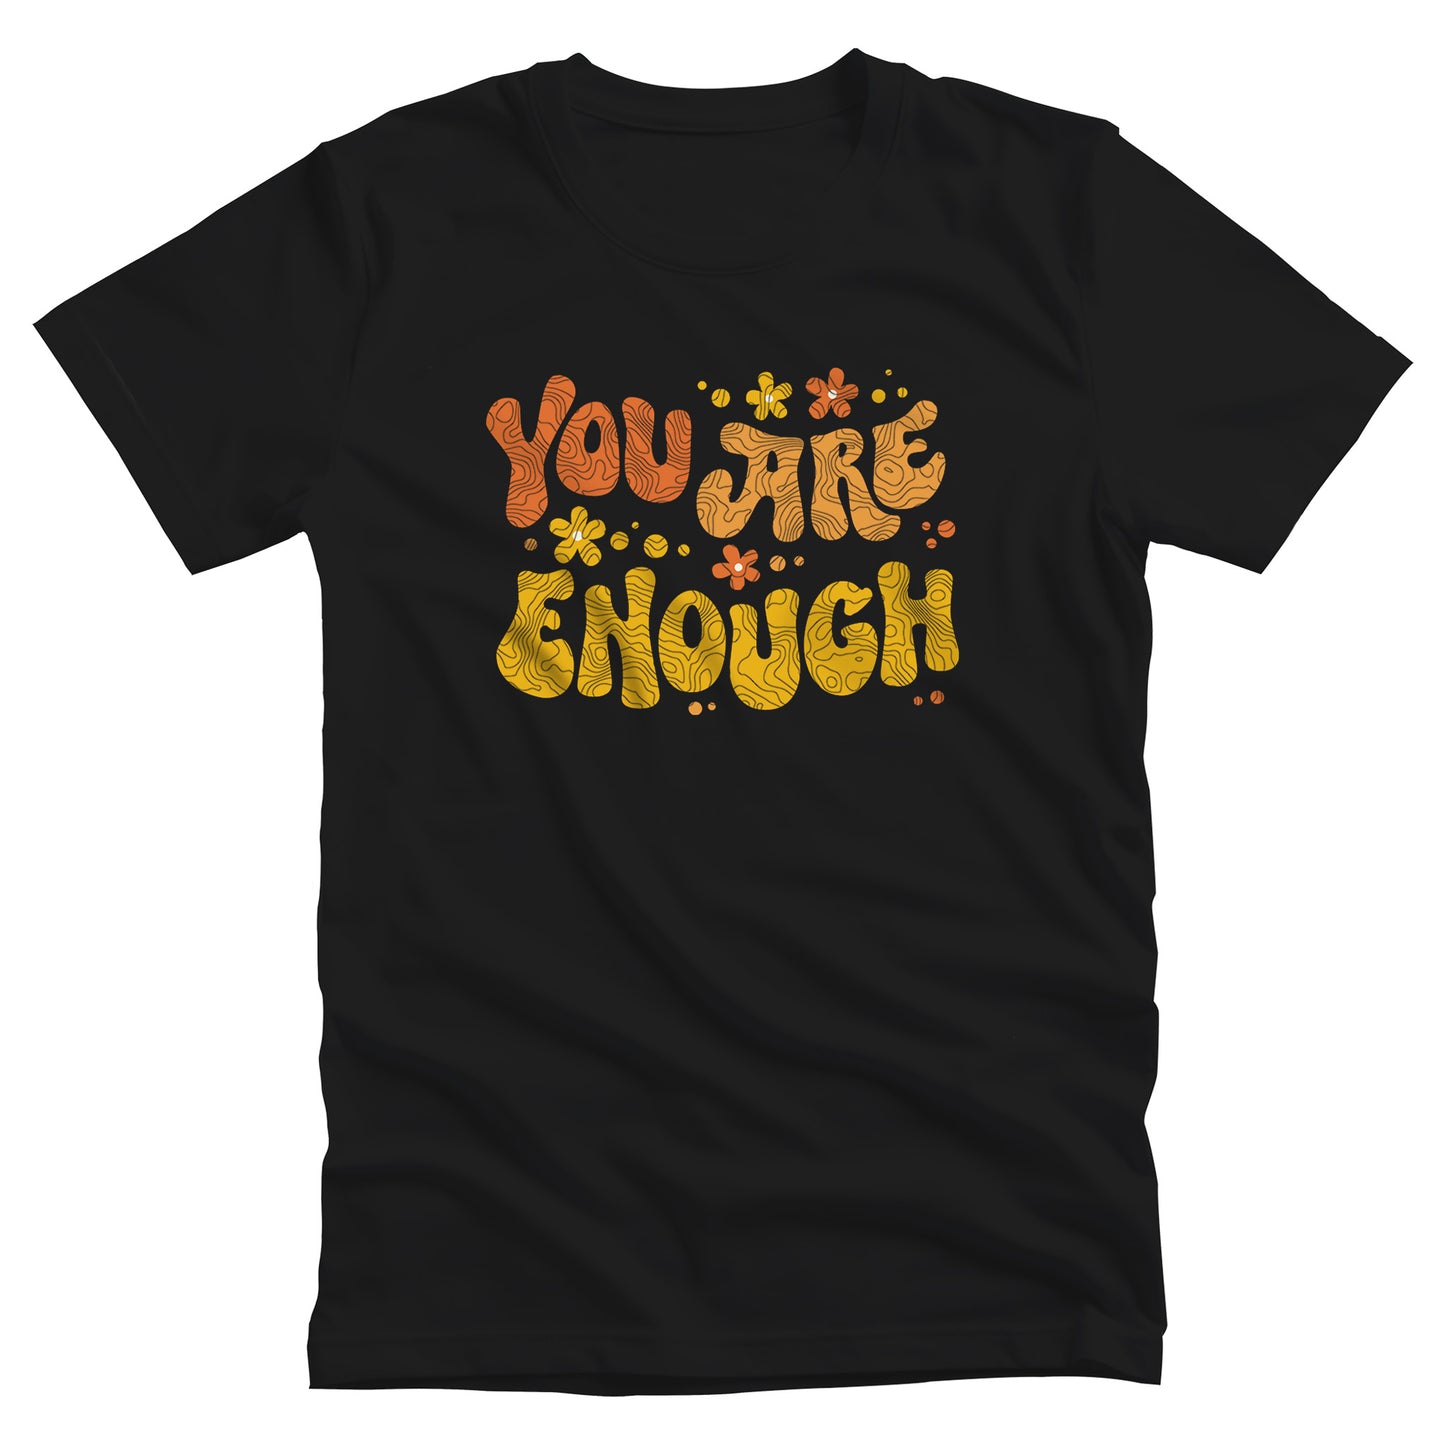 Black unisex t-shirt with a graphic that says “You Are Enough” in a retro font. There are small retro flowers spaced throughout. “You” is reddish-orange, “Are” is orange, and “Enough” is yellow, all retro as well.